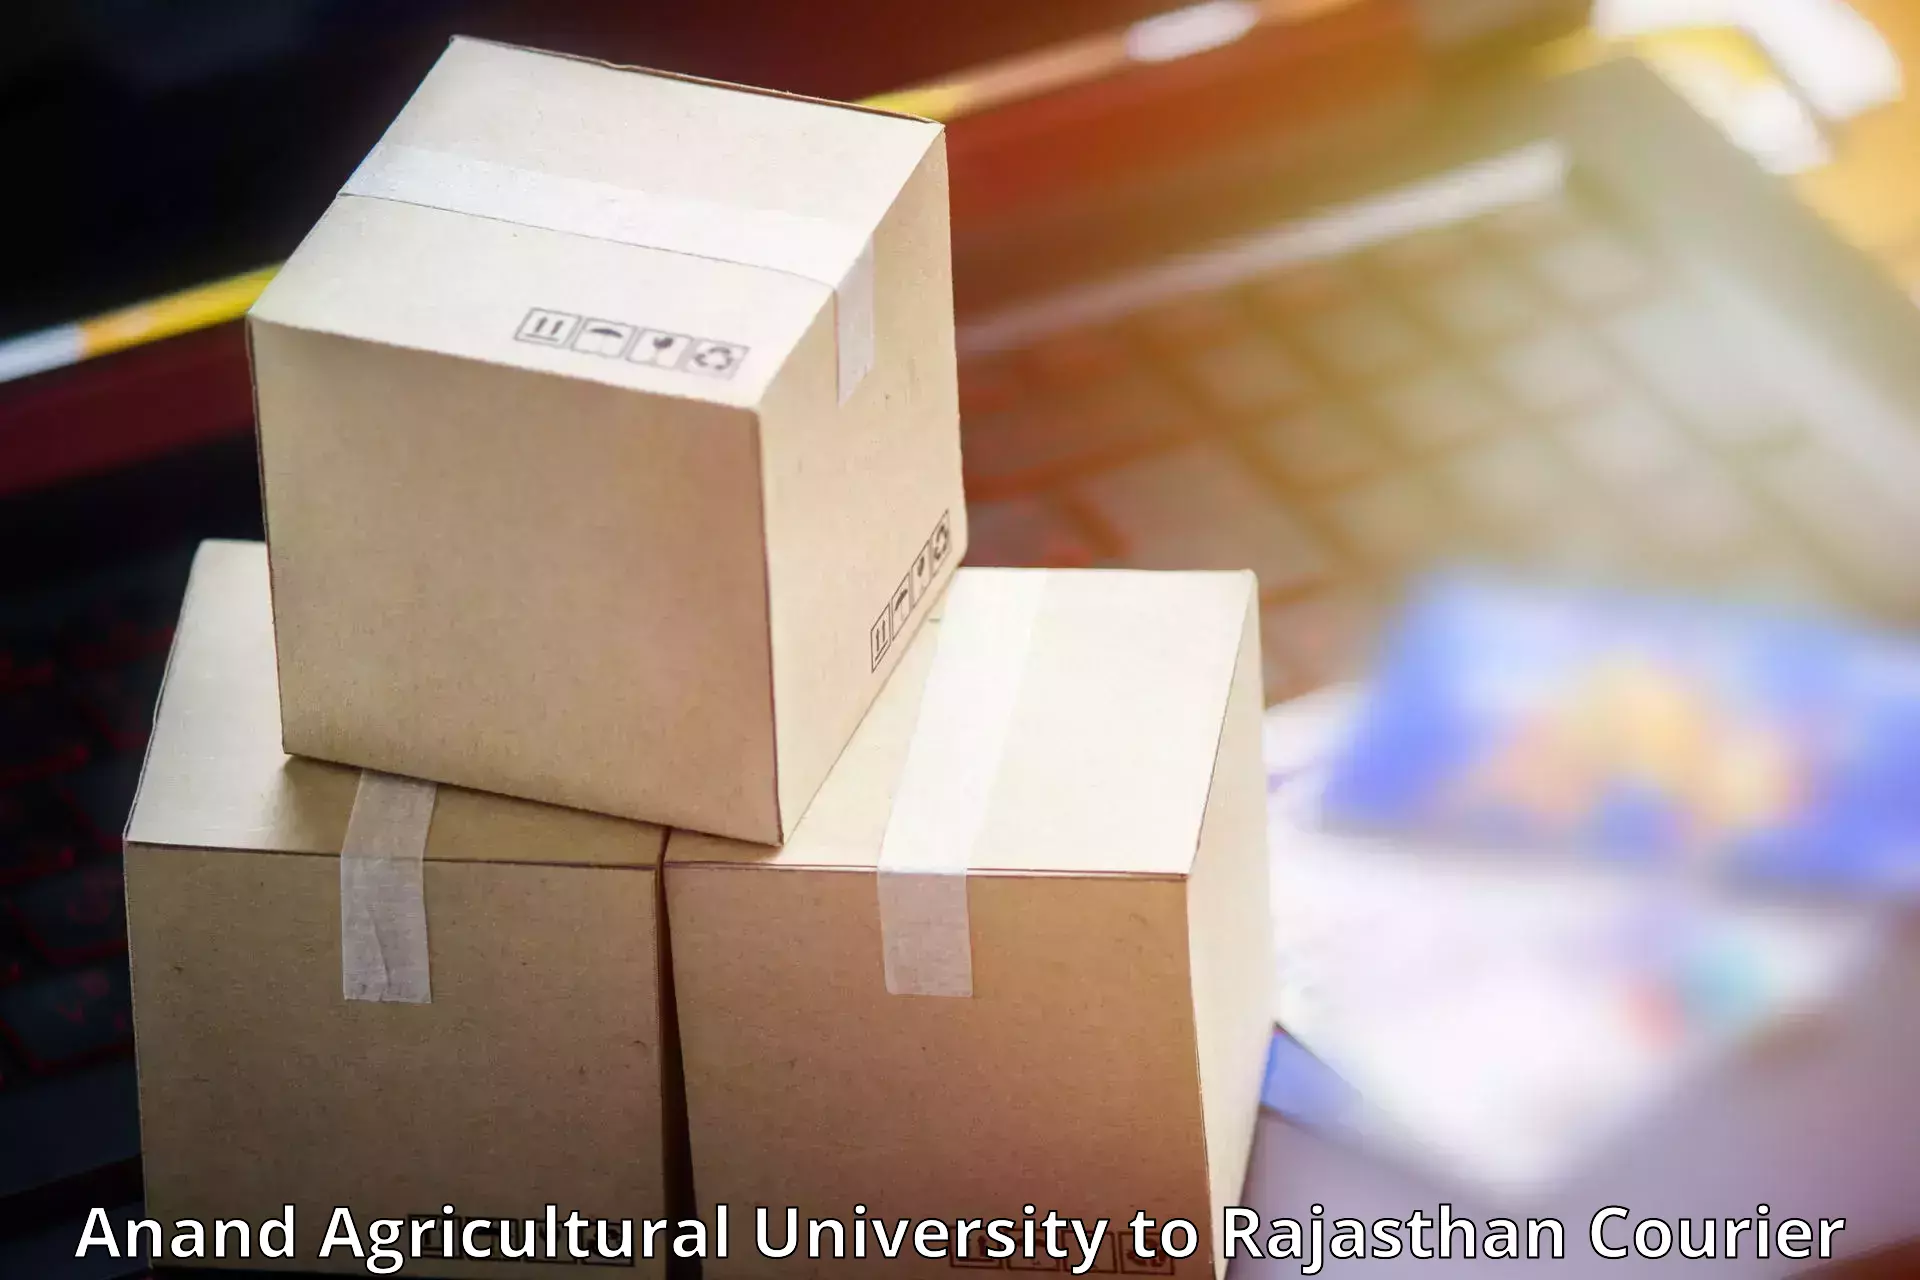 Modern parcel services Anand Agricultural University to Gudha Gorji